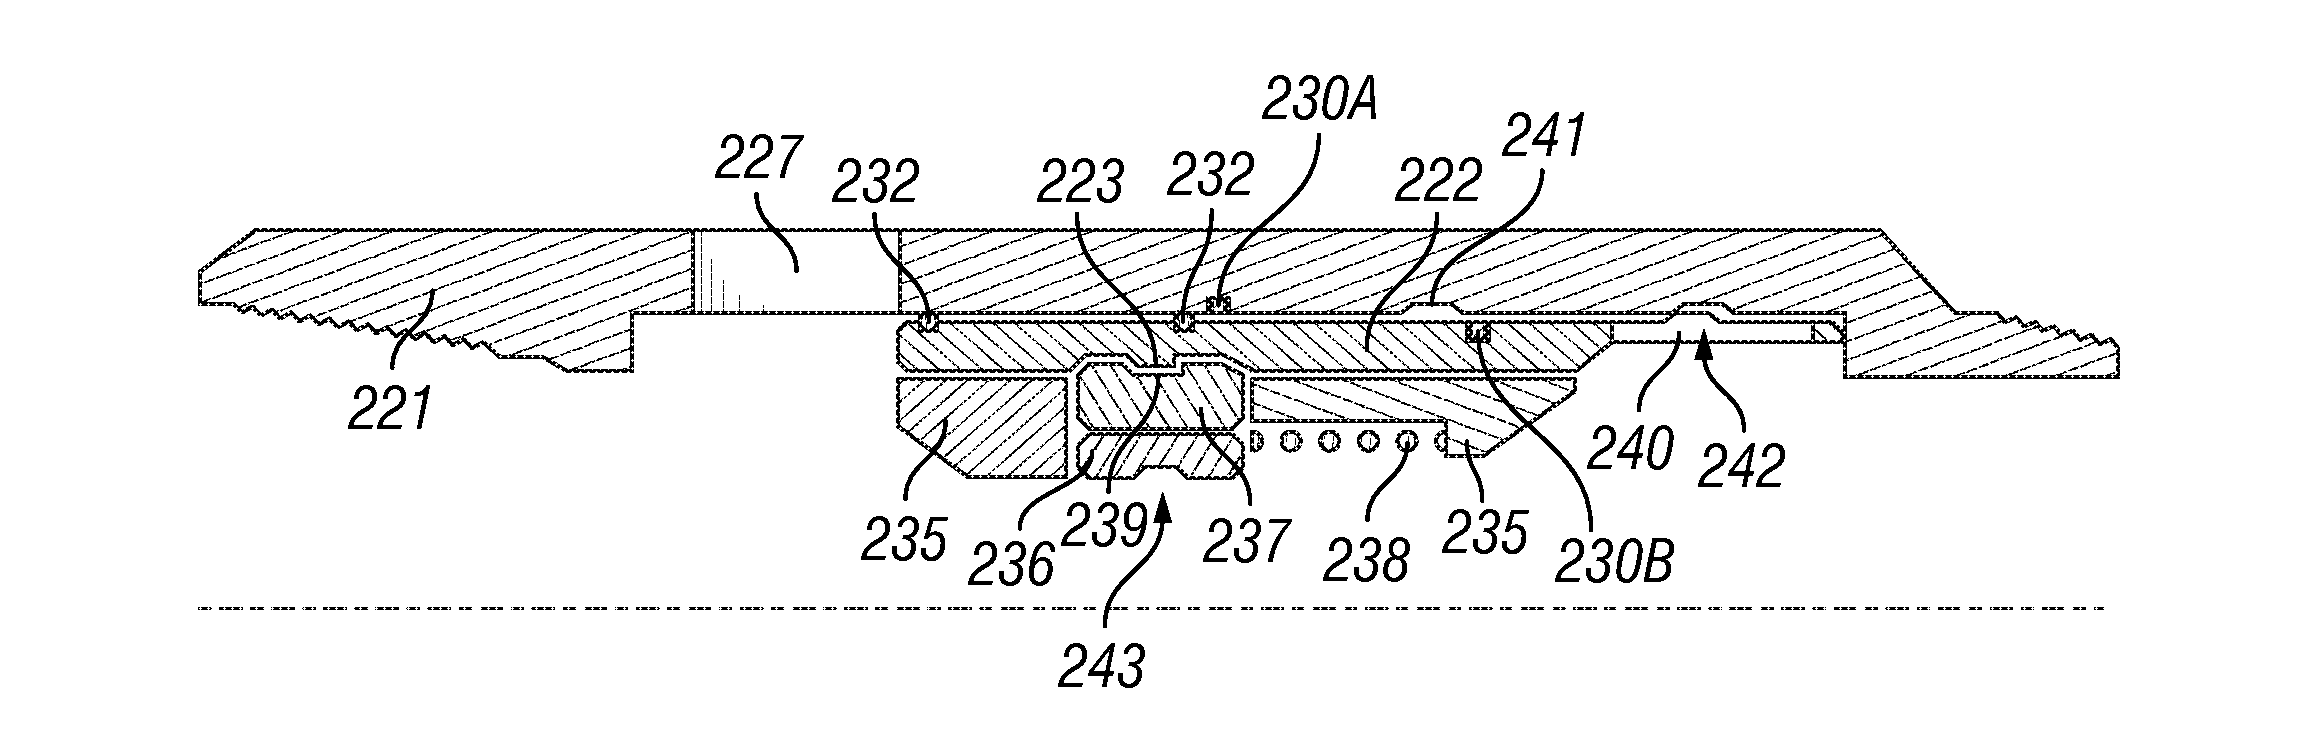 System and method for stimulating multiple production zones in a wellbore with a tubing deployed ball seat